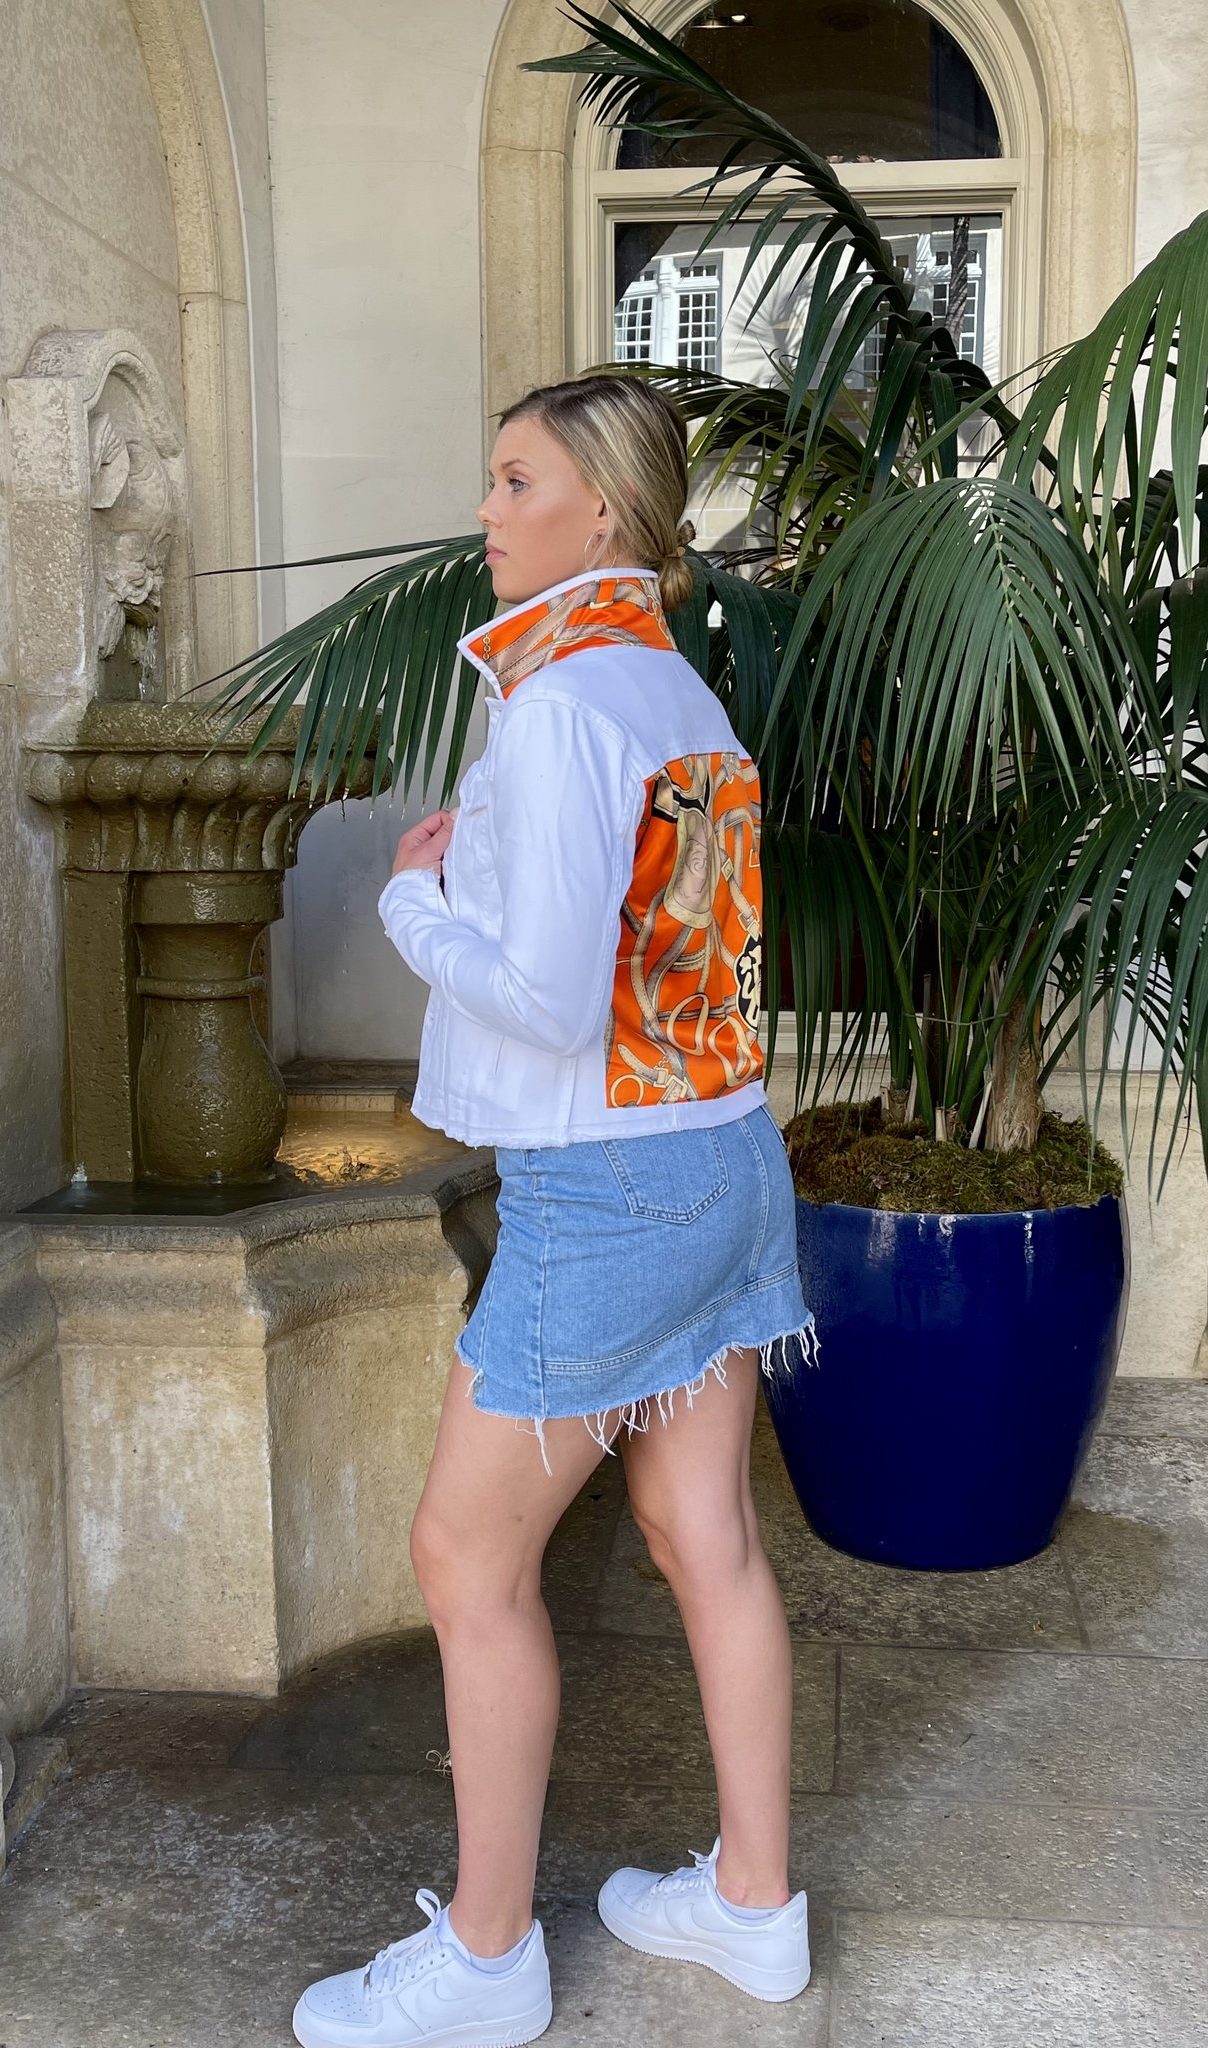 Stacy Bradley Denim Jackets with detail on Collar and Back| Ooh! Ooh! Shoes woman's clothing and shoe boutique located in Naples, charleston and mashpee